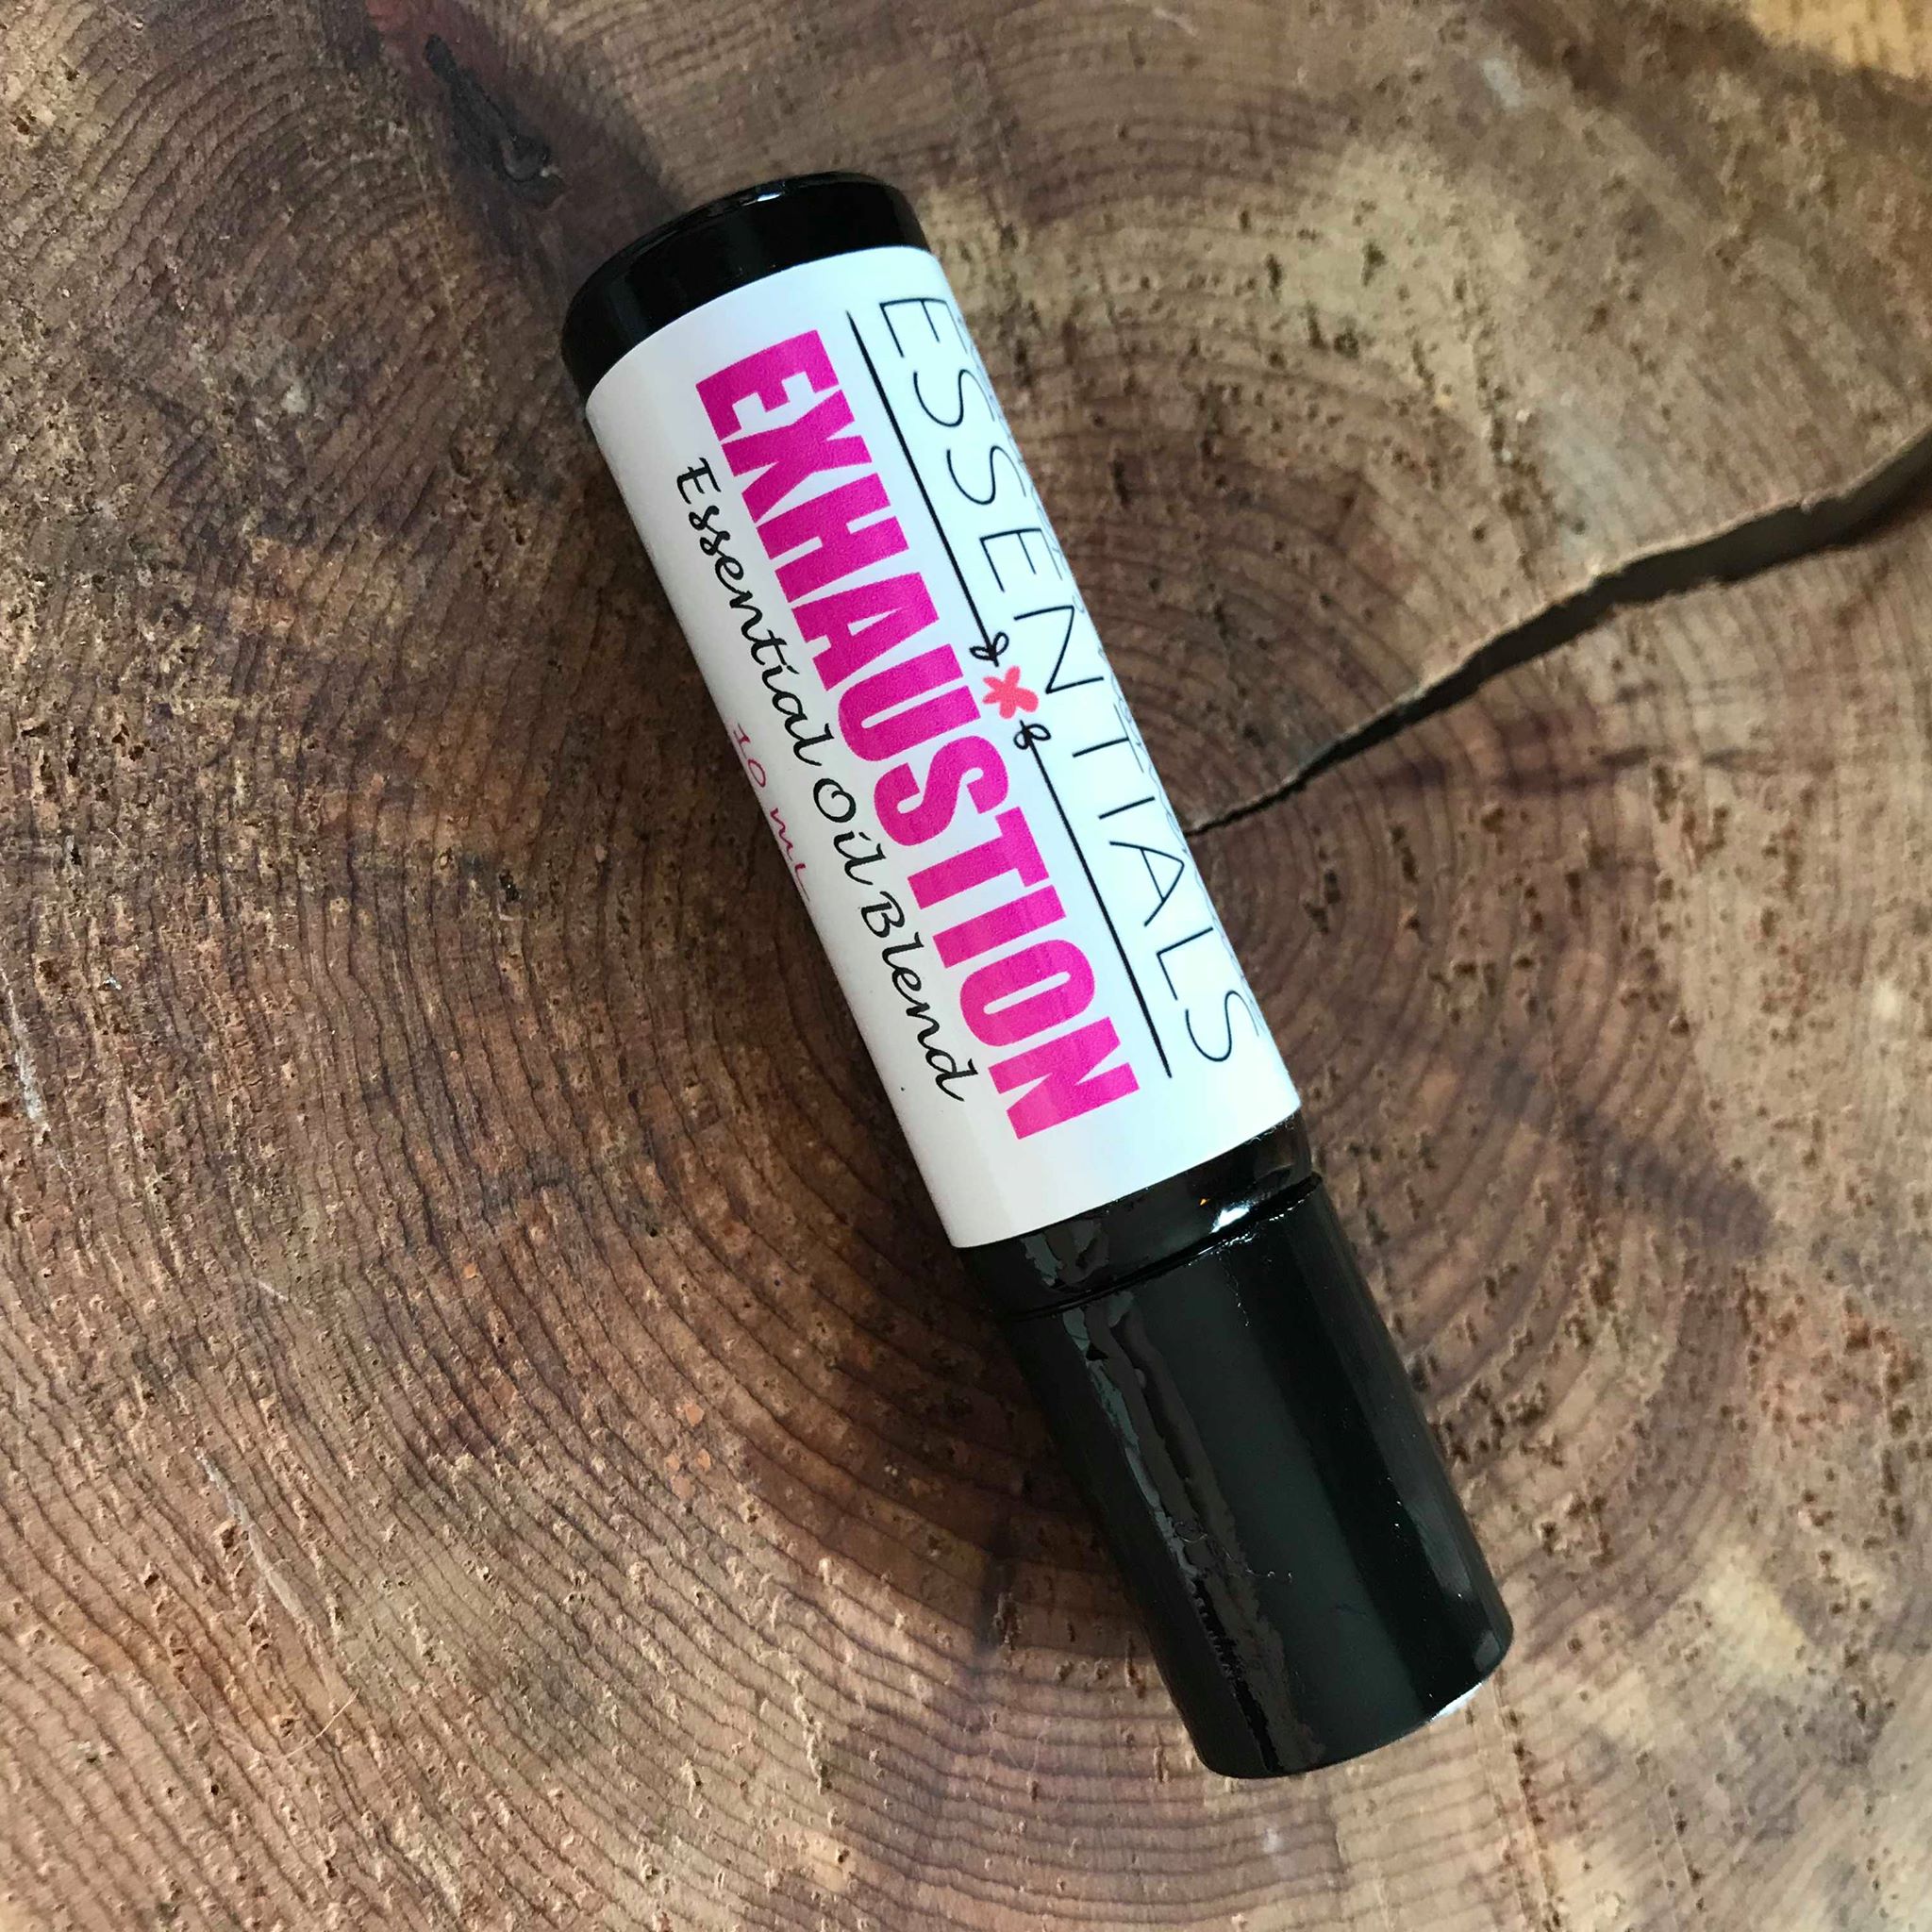 Exhaustion Essential Oil Blend